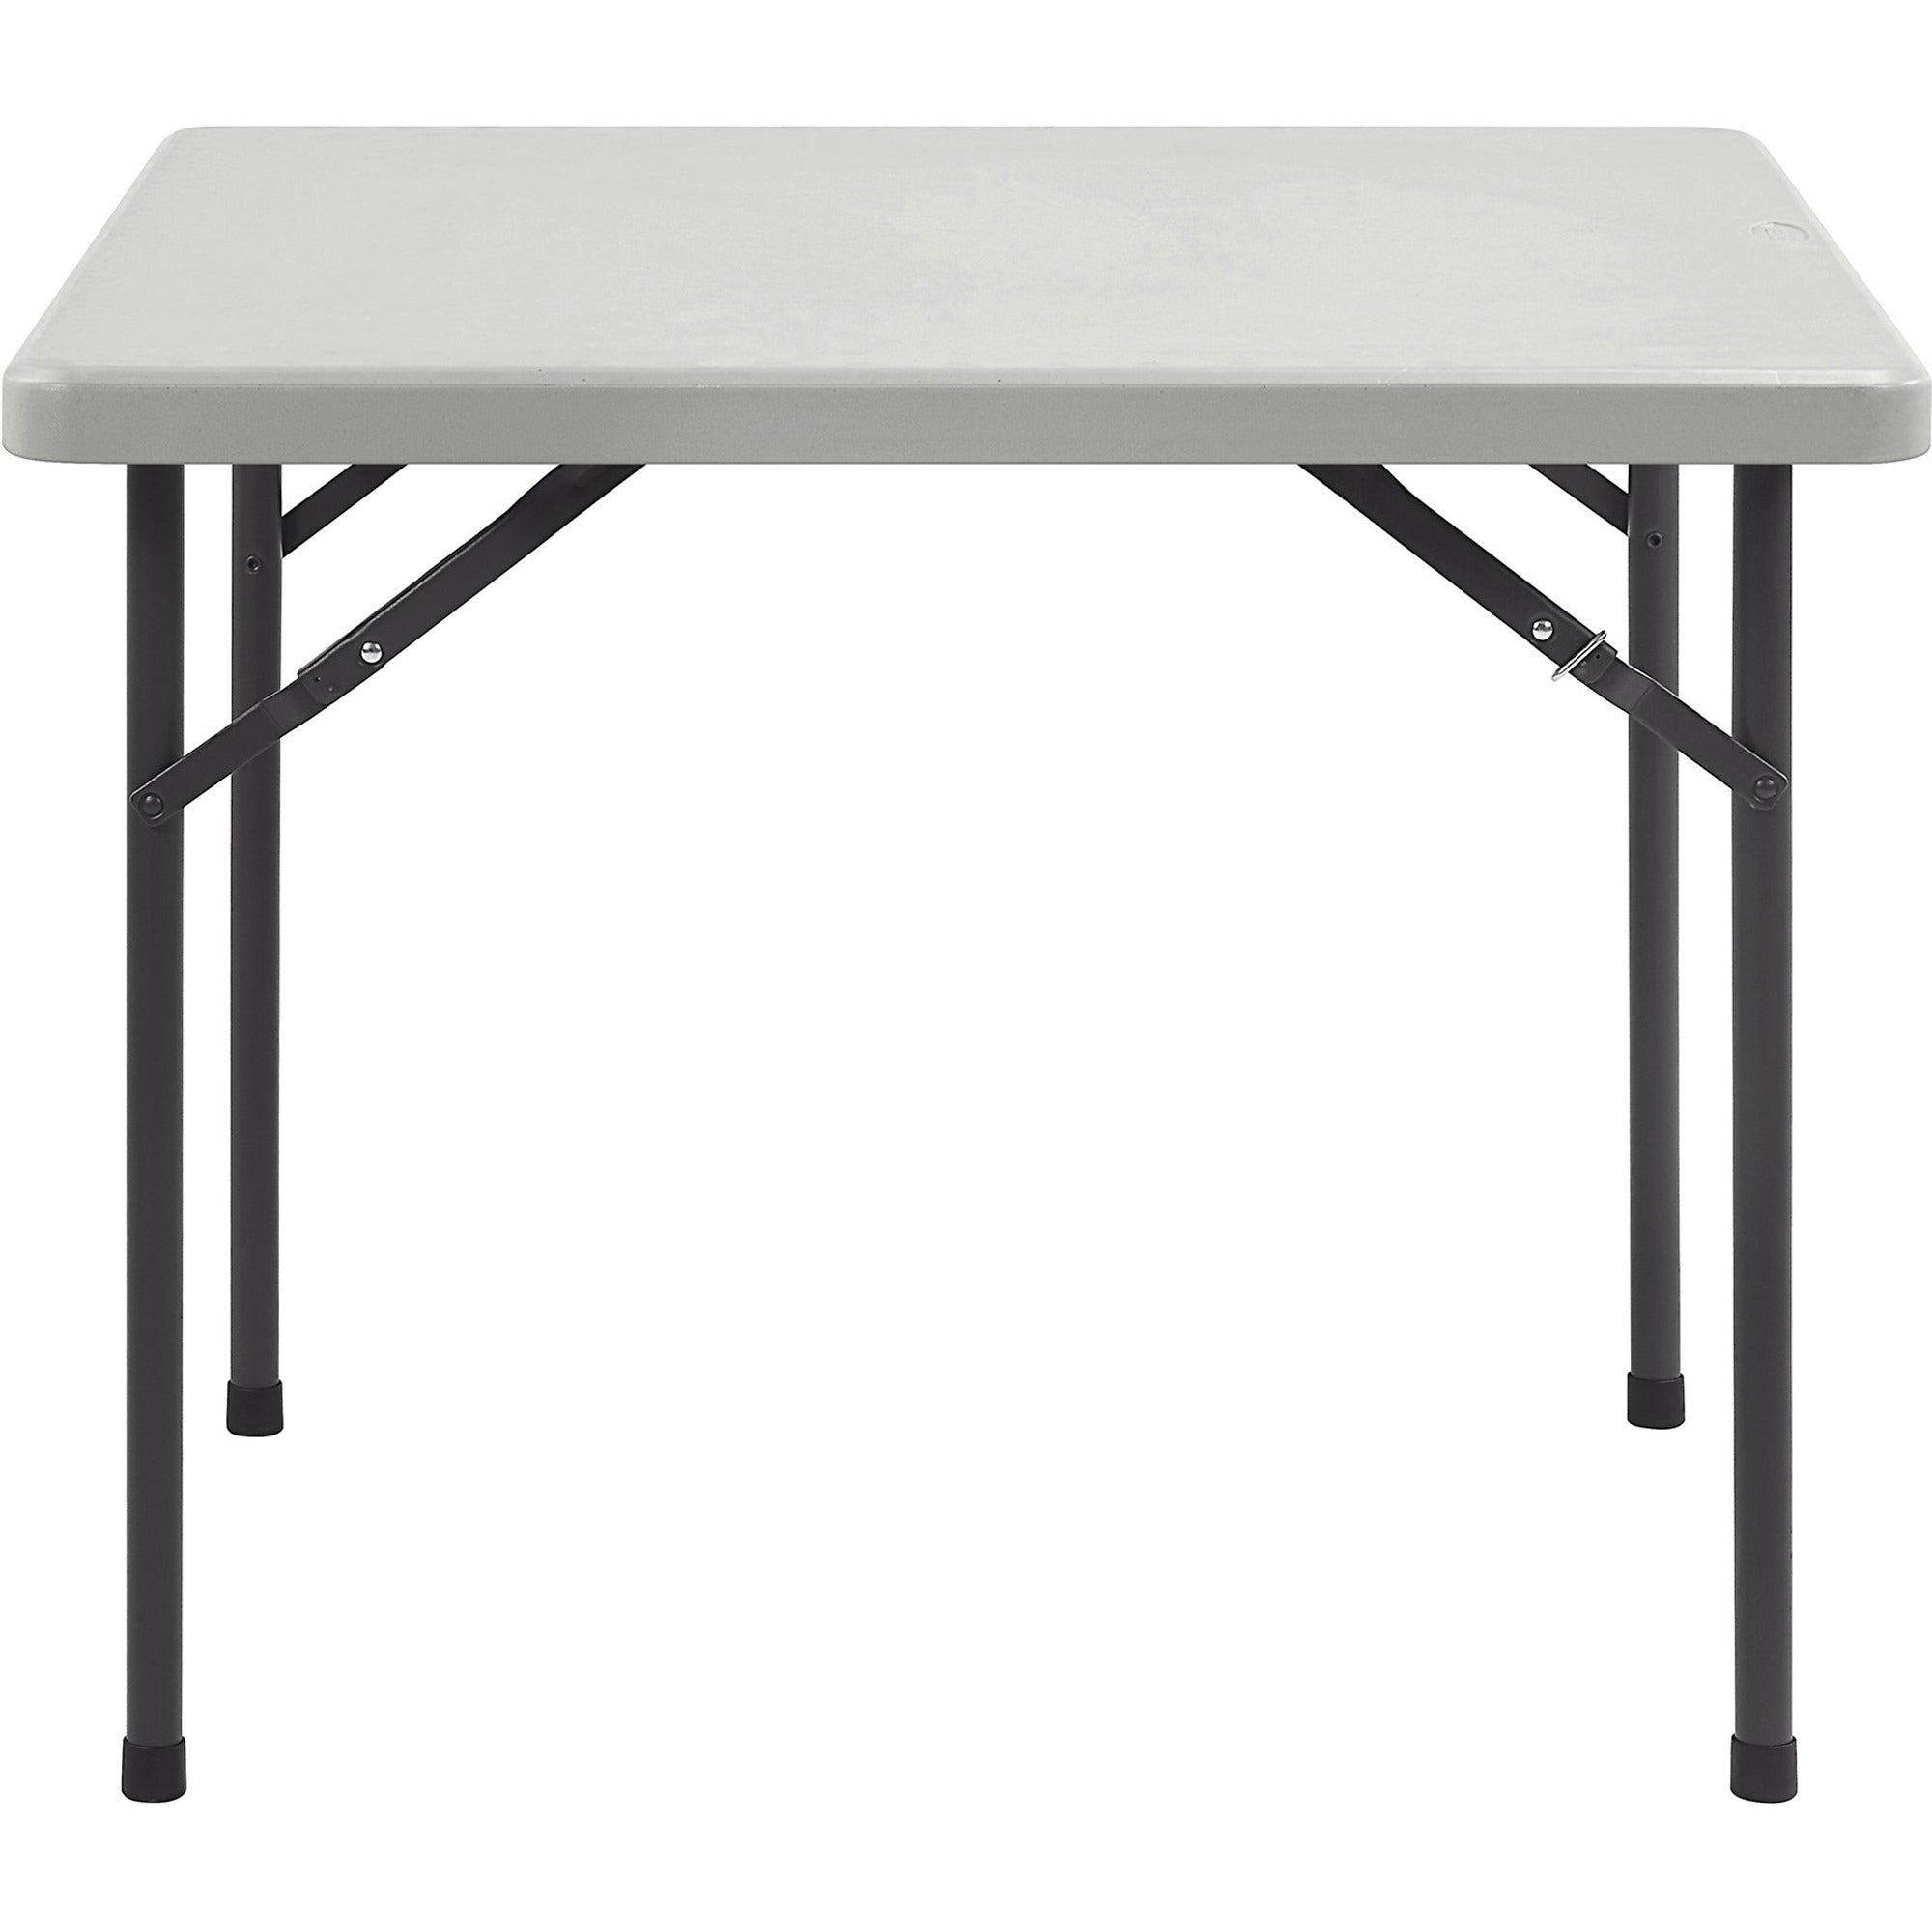 Lorell Ultra-Lite Banquet Folding Table - For - Table TopSquare Top - 600 lb Capacity - 29" Height x 36" Width x 36" Depth - Gray, Powder Coated - 1 Each - 